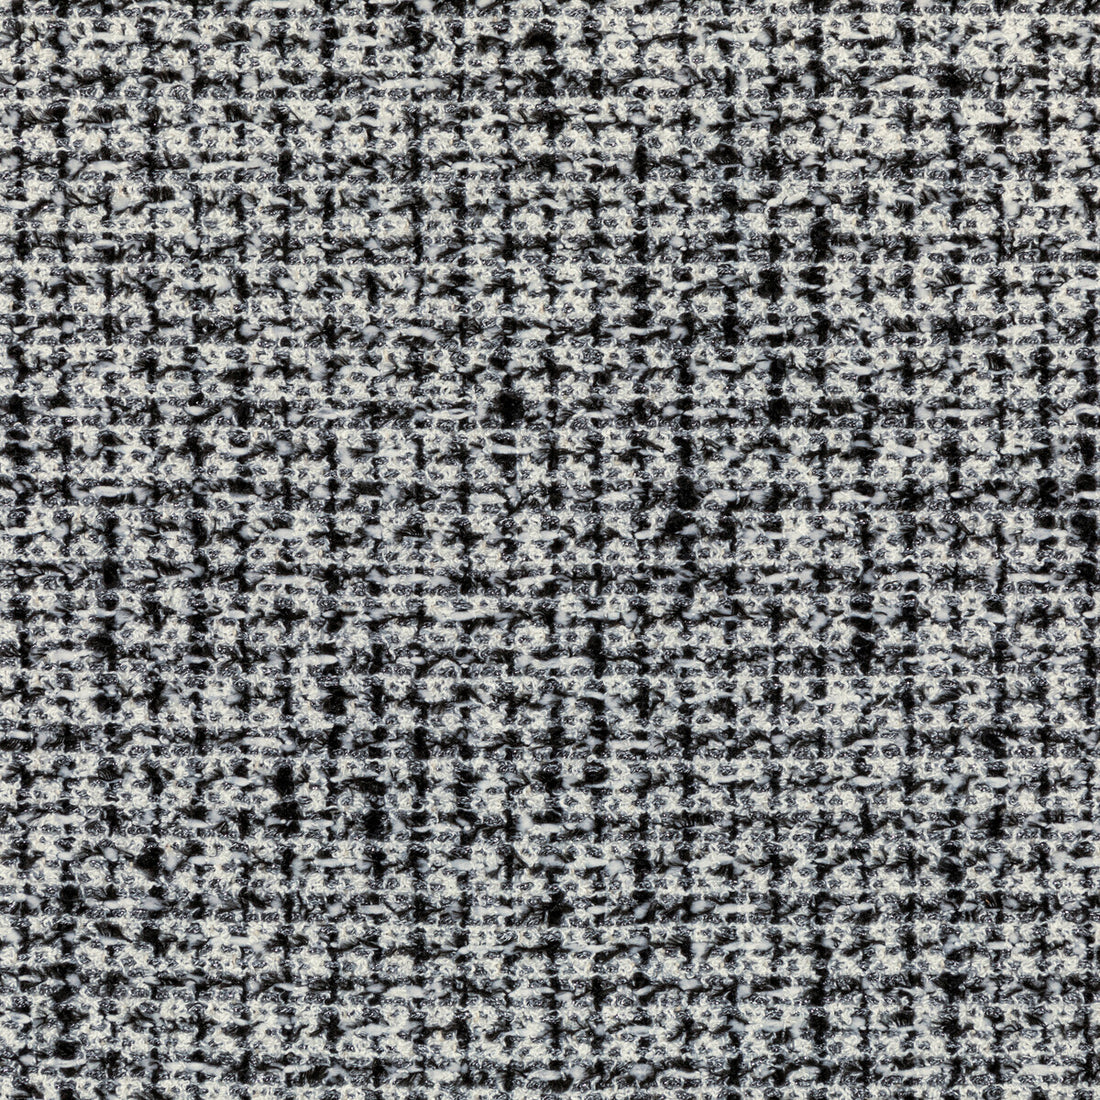 Party Dress fabric in noir color - pattern 36100.81.0 - by Kravet Couture in the Luxury Textures II collection